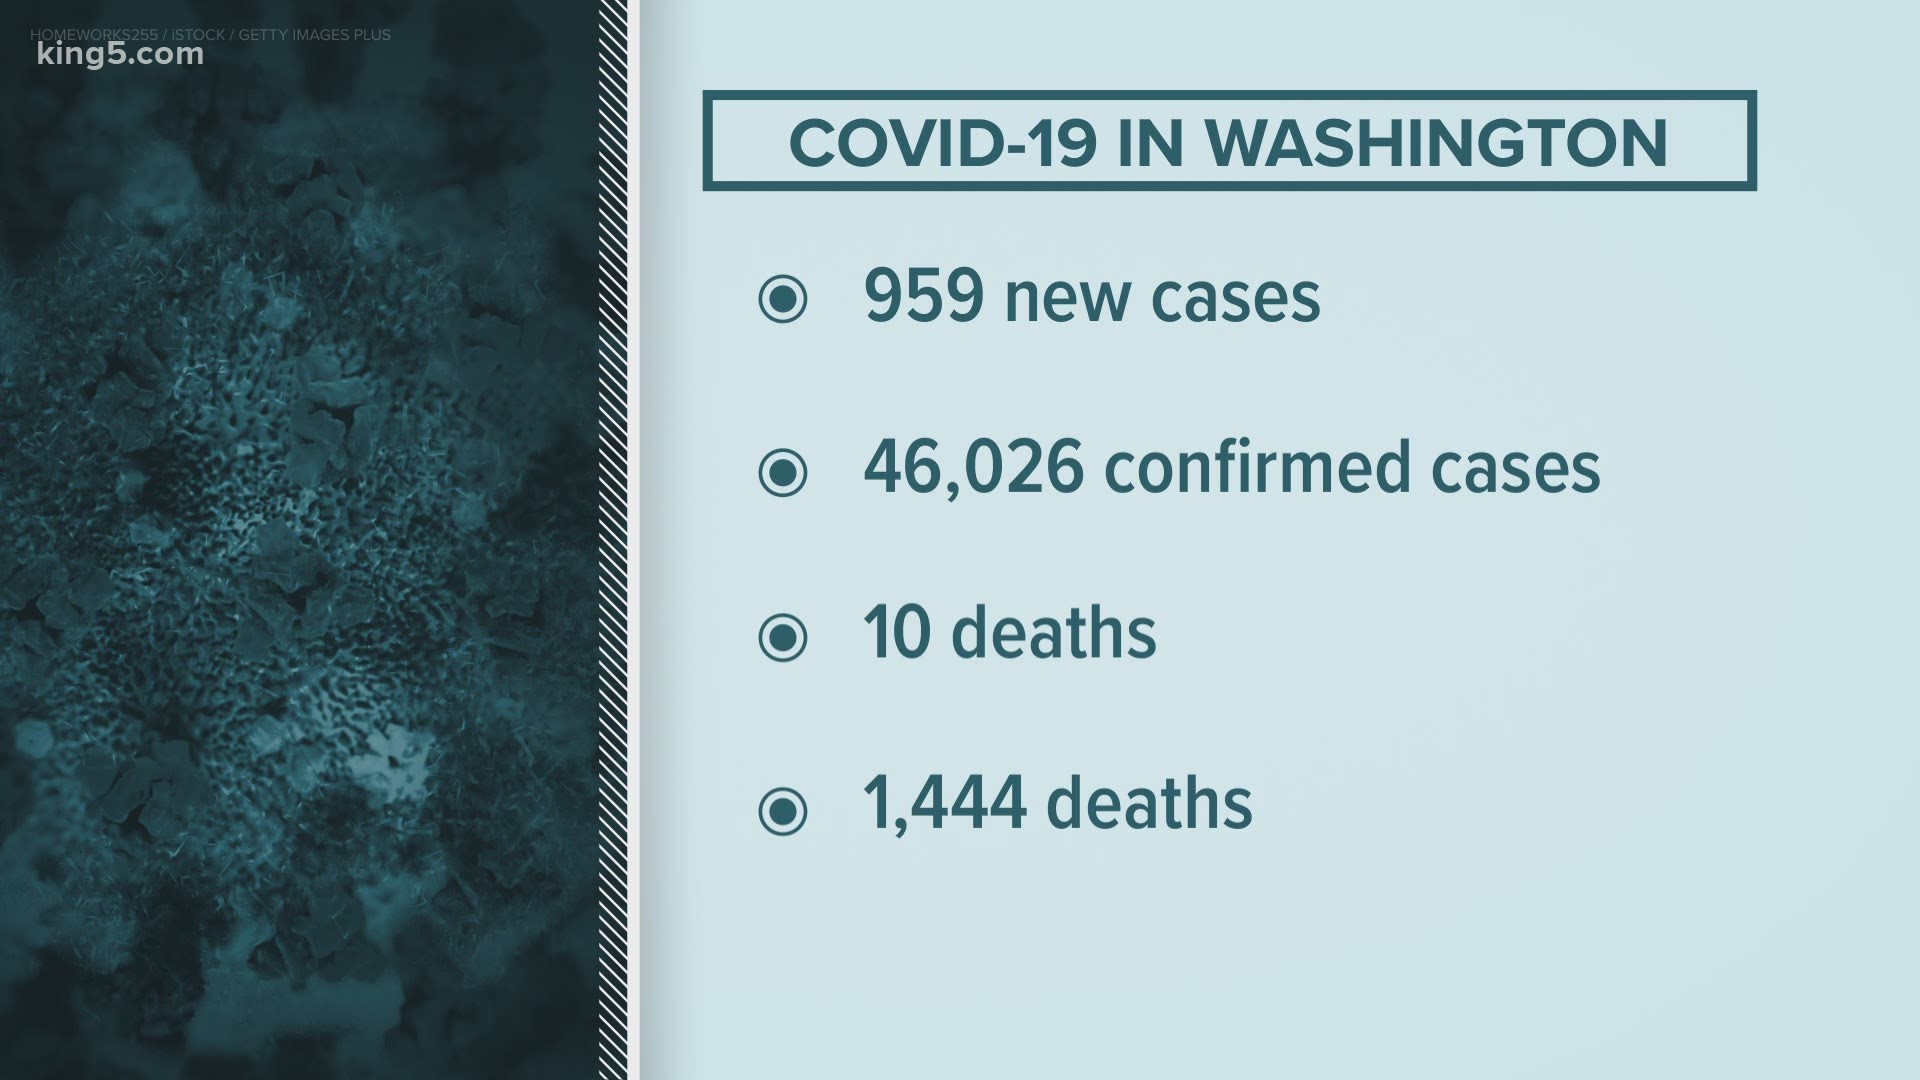 The latest on the coronavirus pandemic in Washington state from KING 5 News on July 18 at 10 p.m. More: www.king5.com/coronavirus.